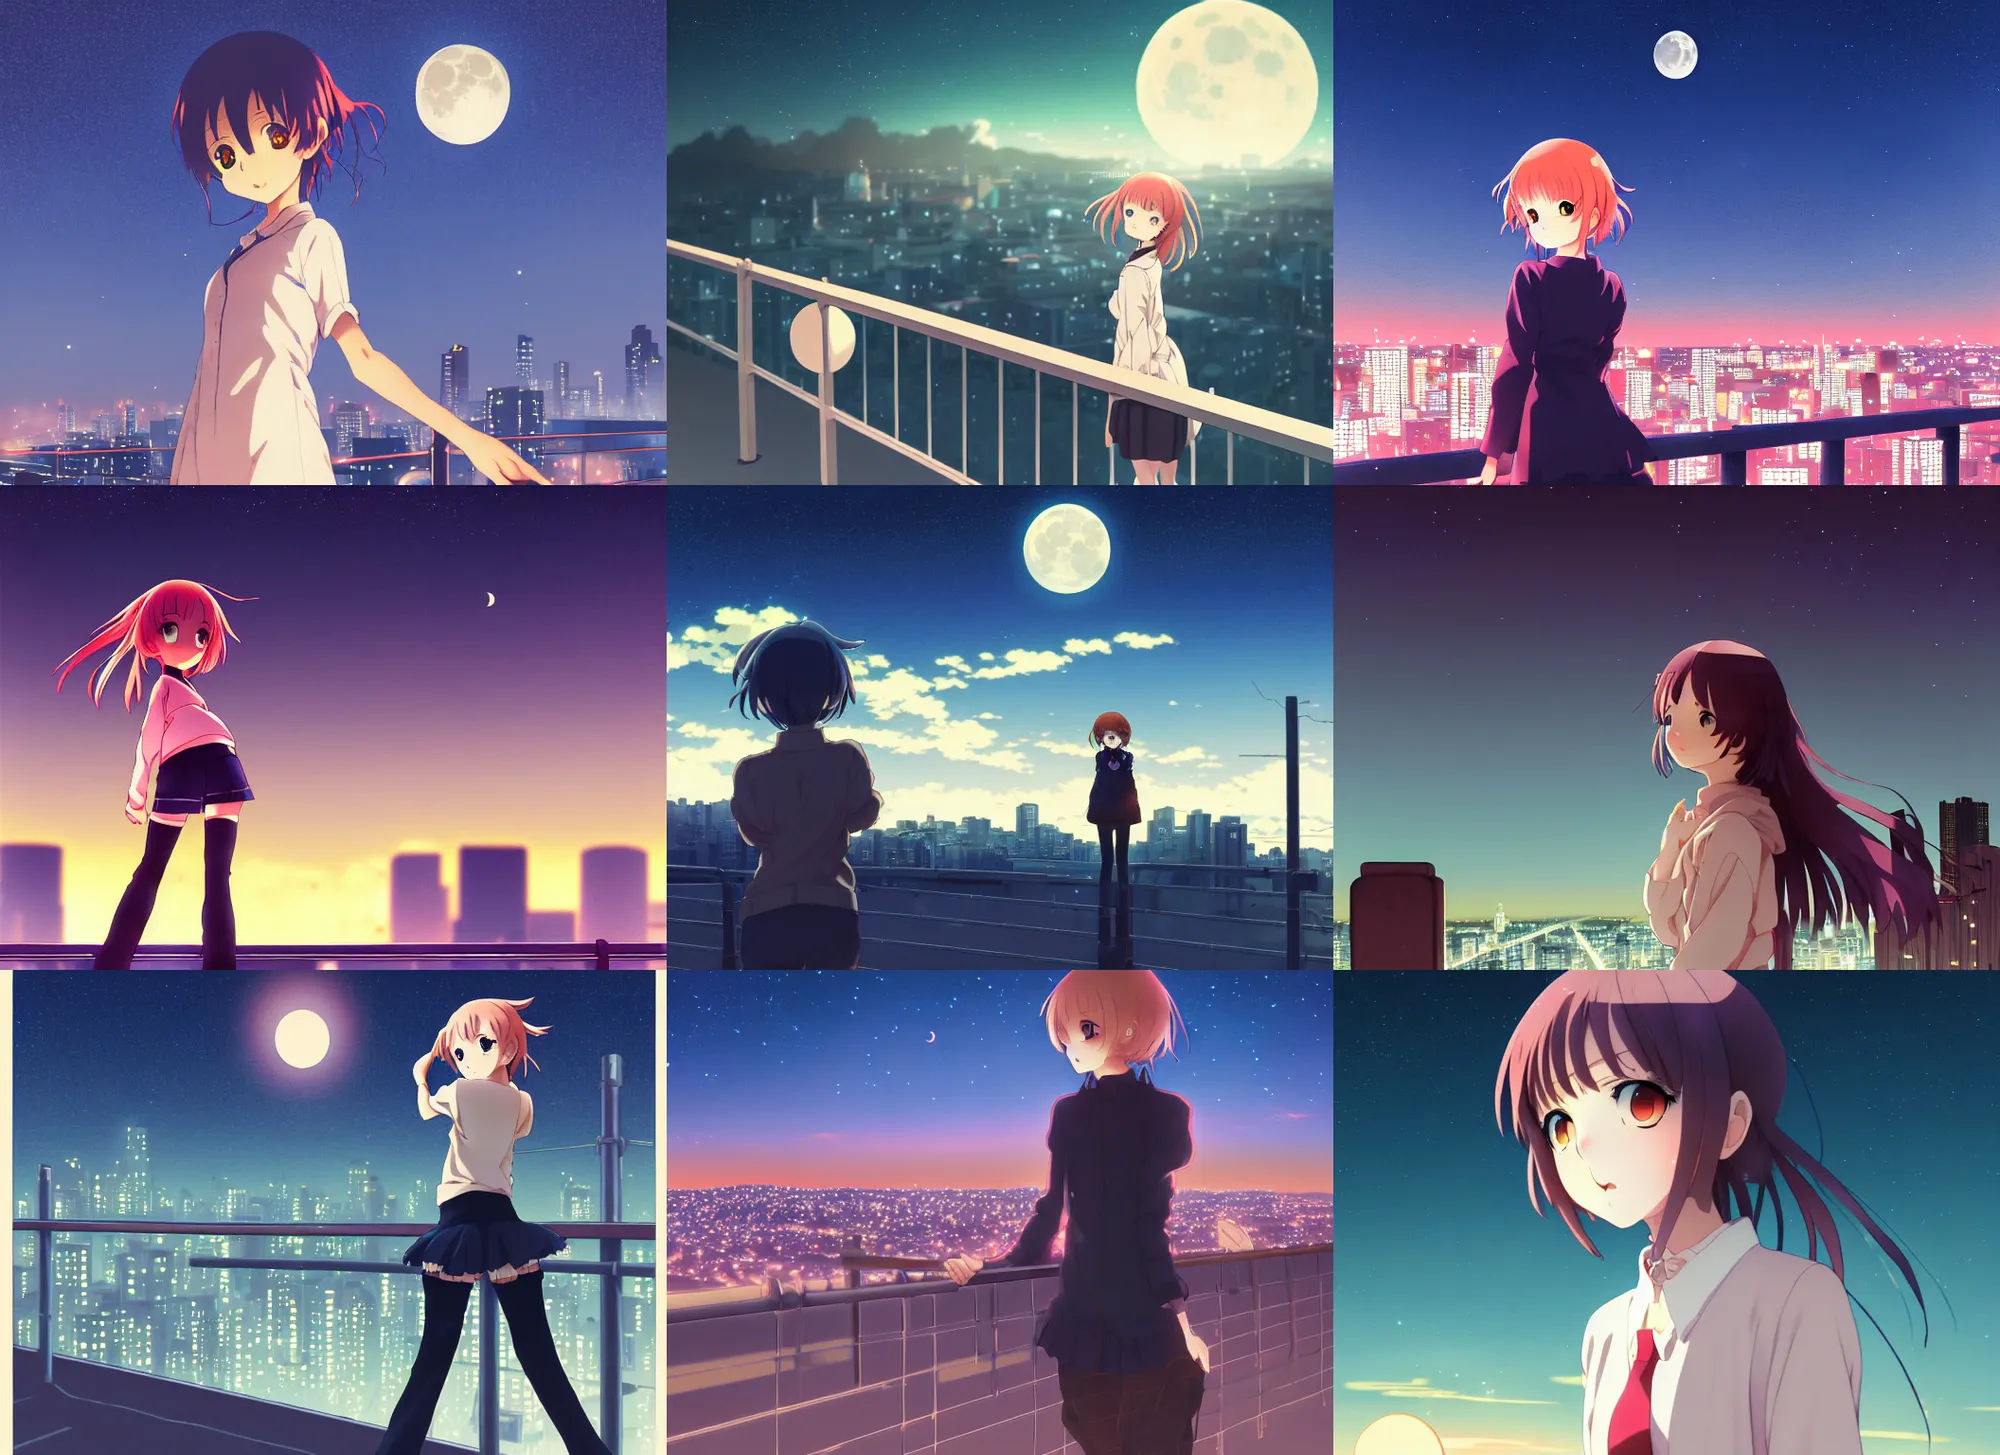 Prompt: anime visual, portrait of a young female sightseeing above the city at night, guardrail, moon, cute face by yoh yoshinari, katsura masakazu, studio light, dynamic pose, dynamic perspective, strong silhouette, ilya kuvshinov, anime cels, 1 8 mm lens, fstop of 8, rounded eyes, moody